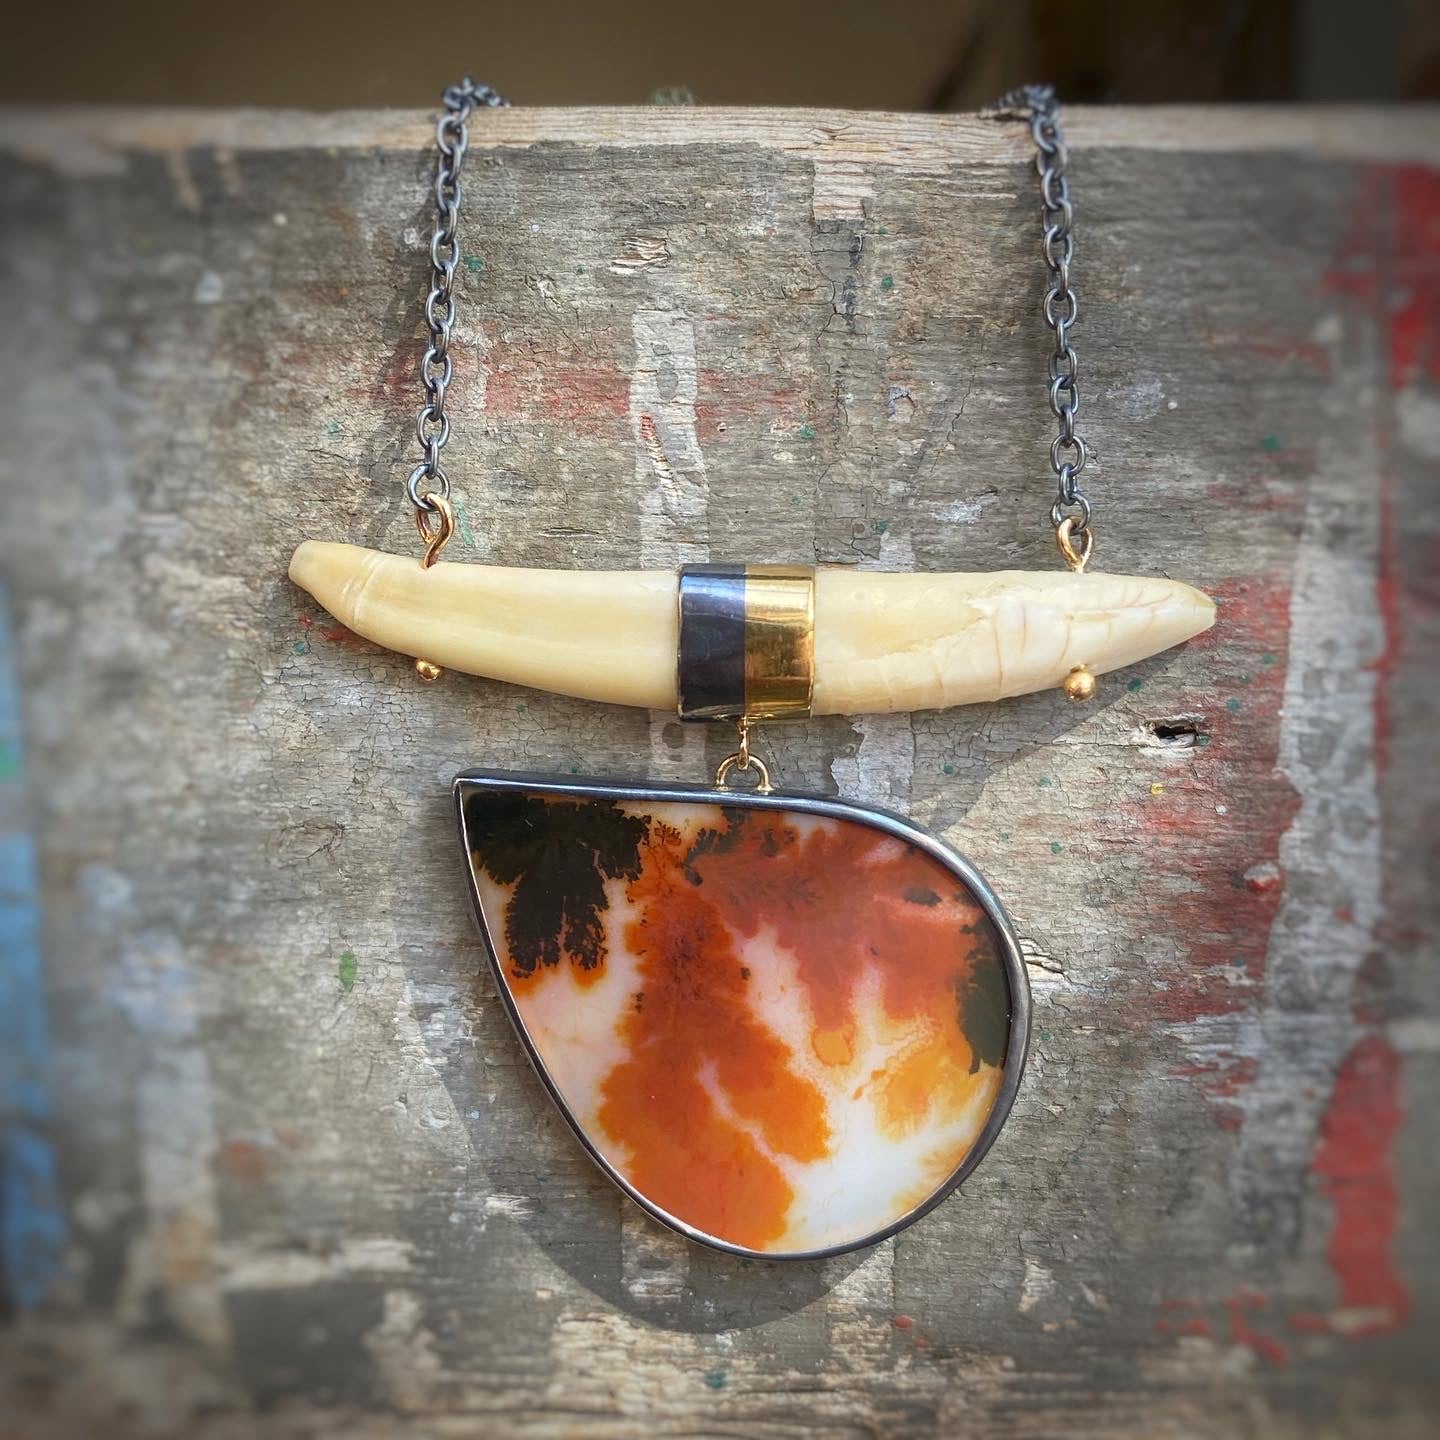 Dendritic Agate and Wild Boar Tooth Necklace